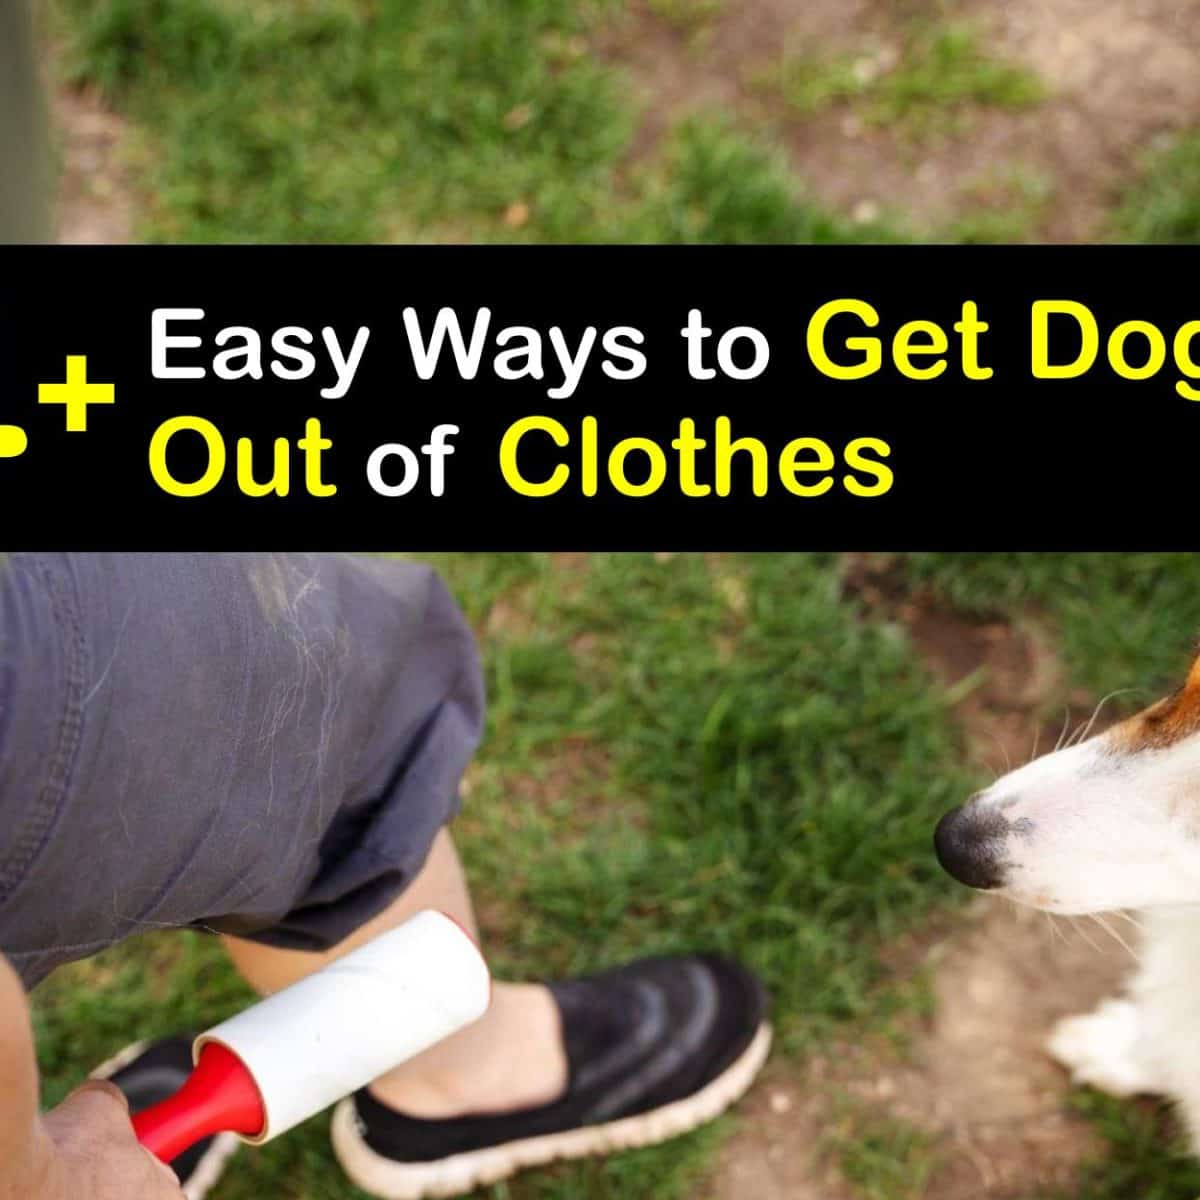 Eliminate Dog Fur from Clothing - Tricks for Removing Dog Hair in Clothes